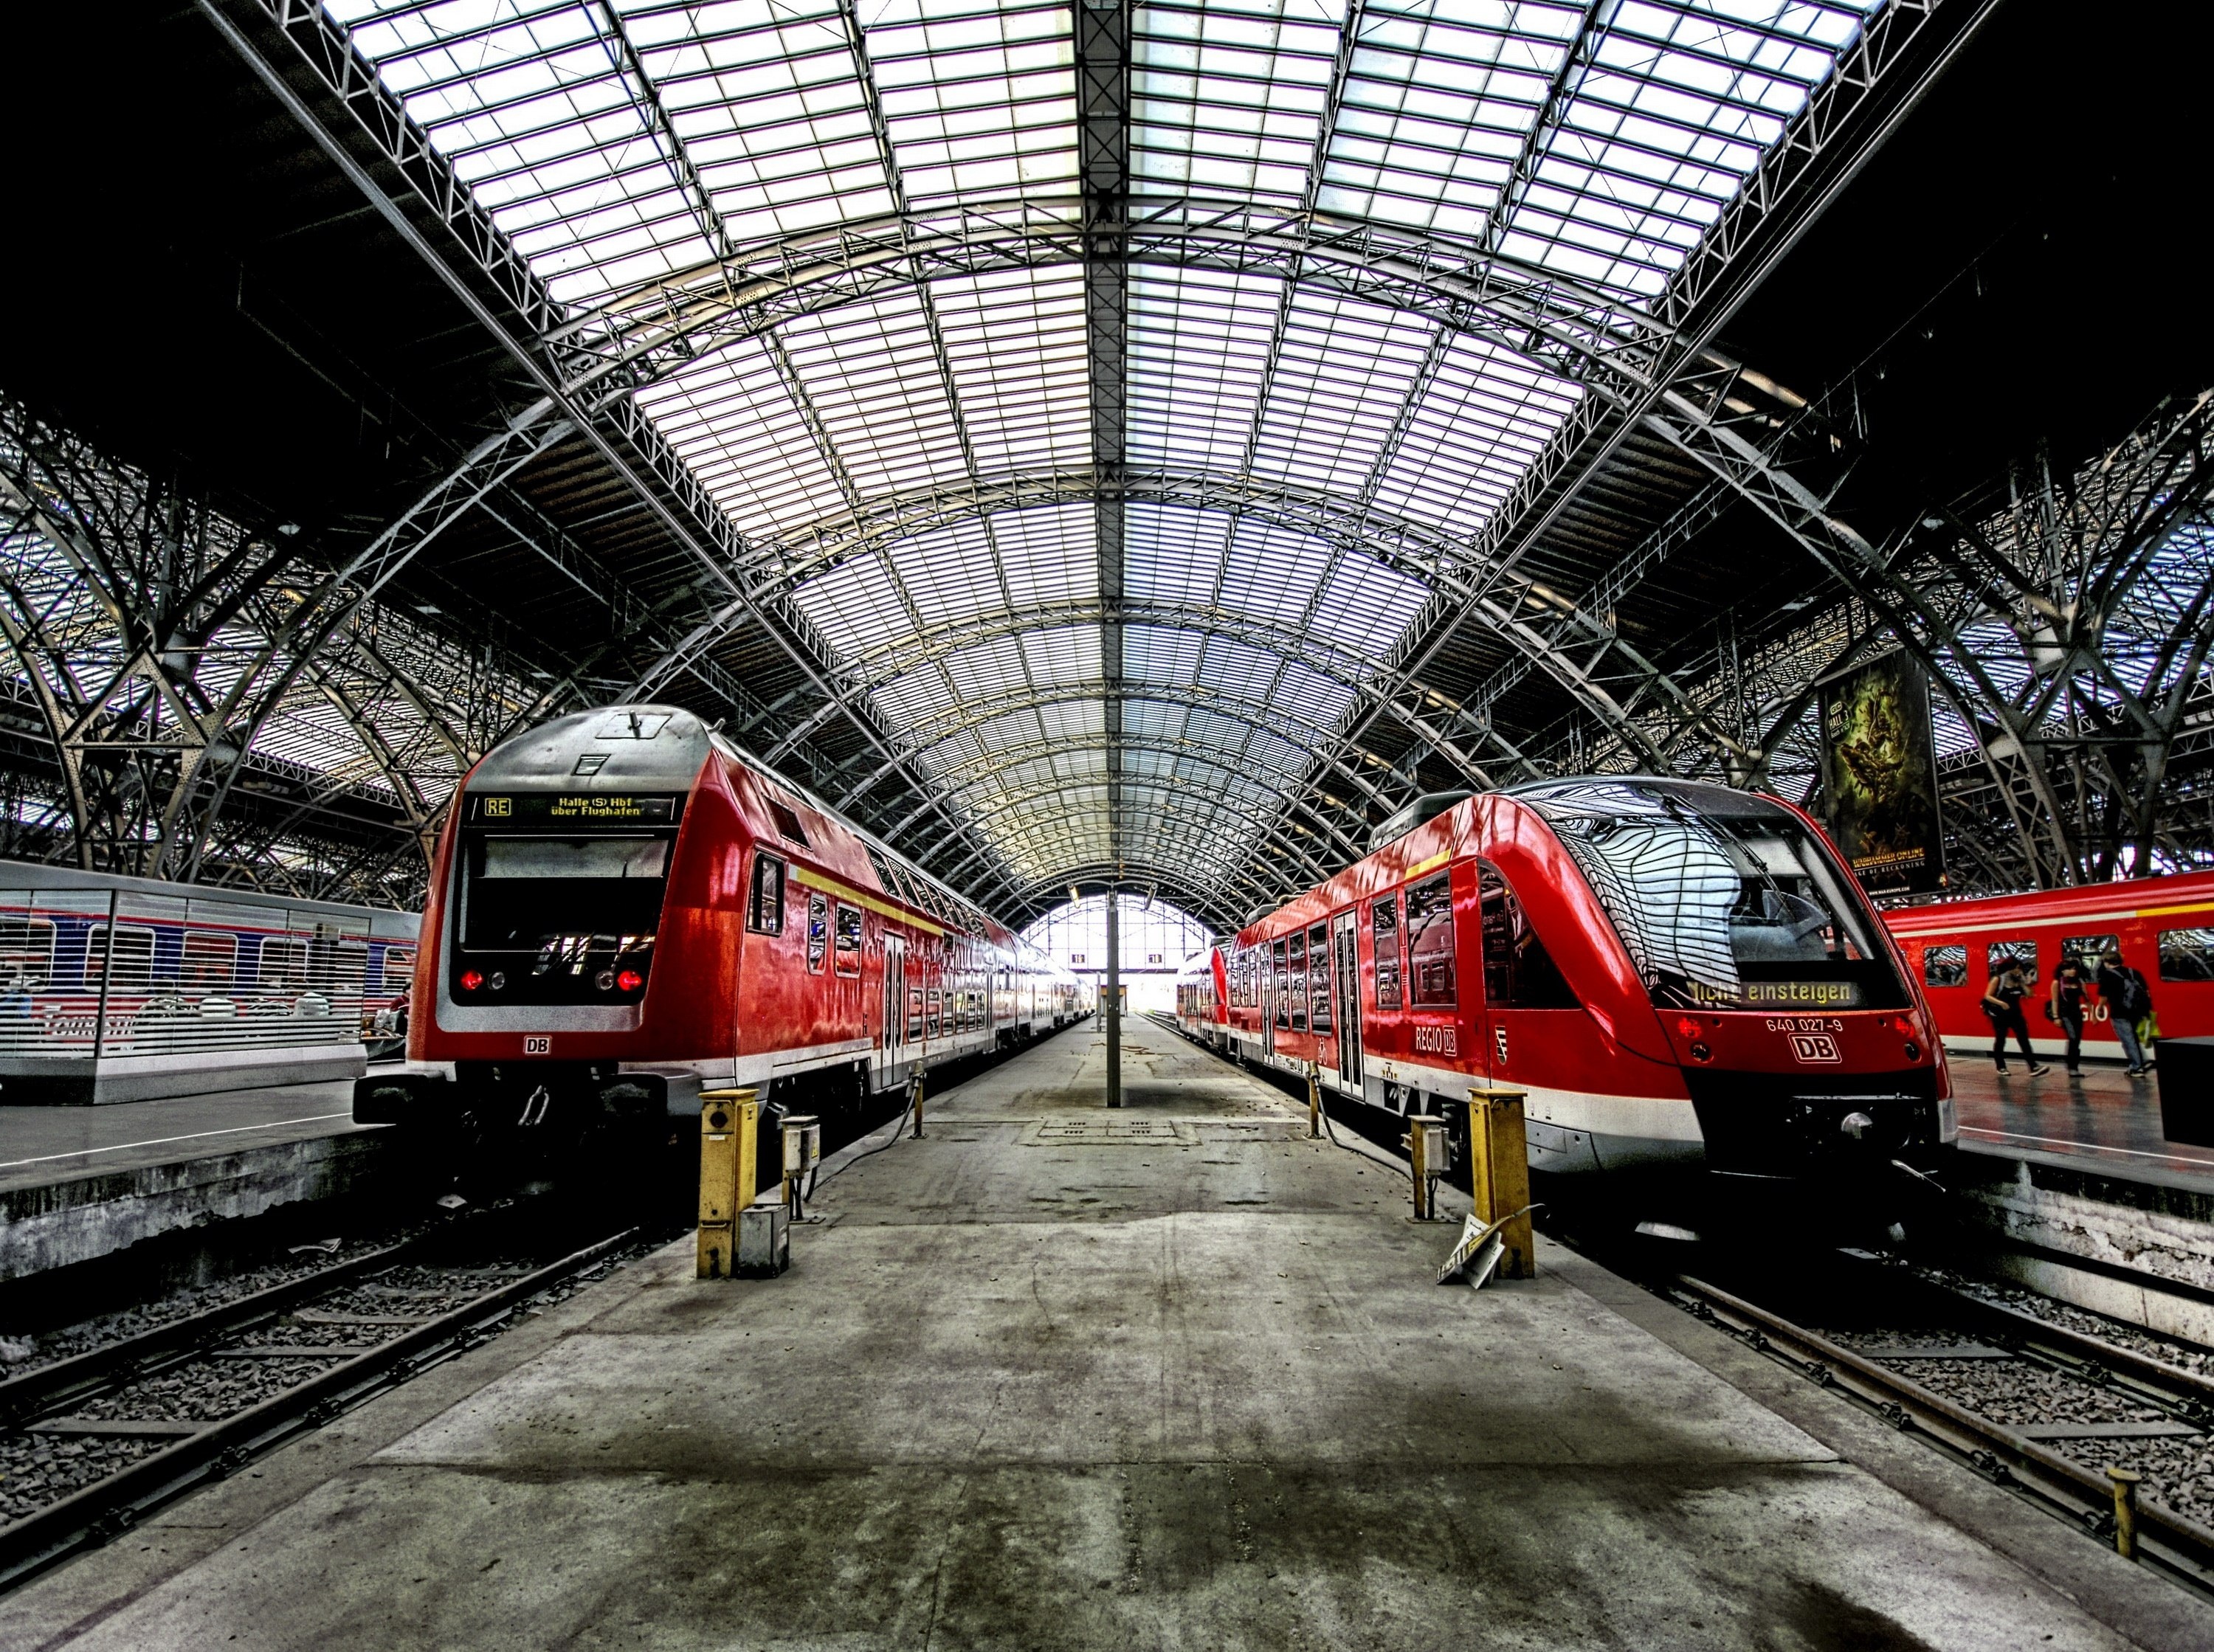 Railway Station Photos Download The BEST Free Railway Station Stock Photos   HD Images